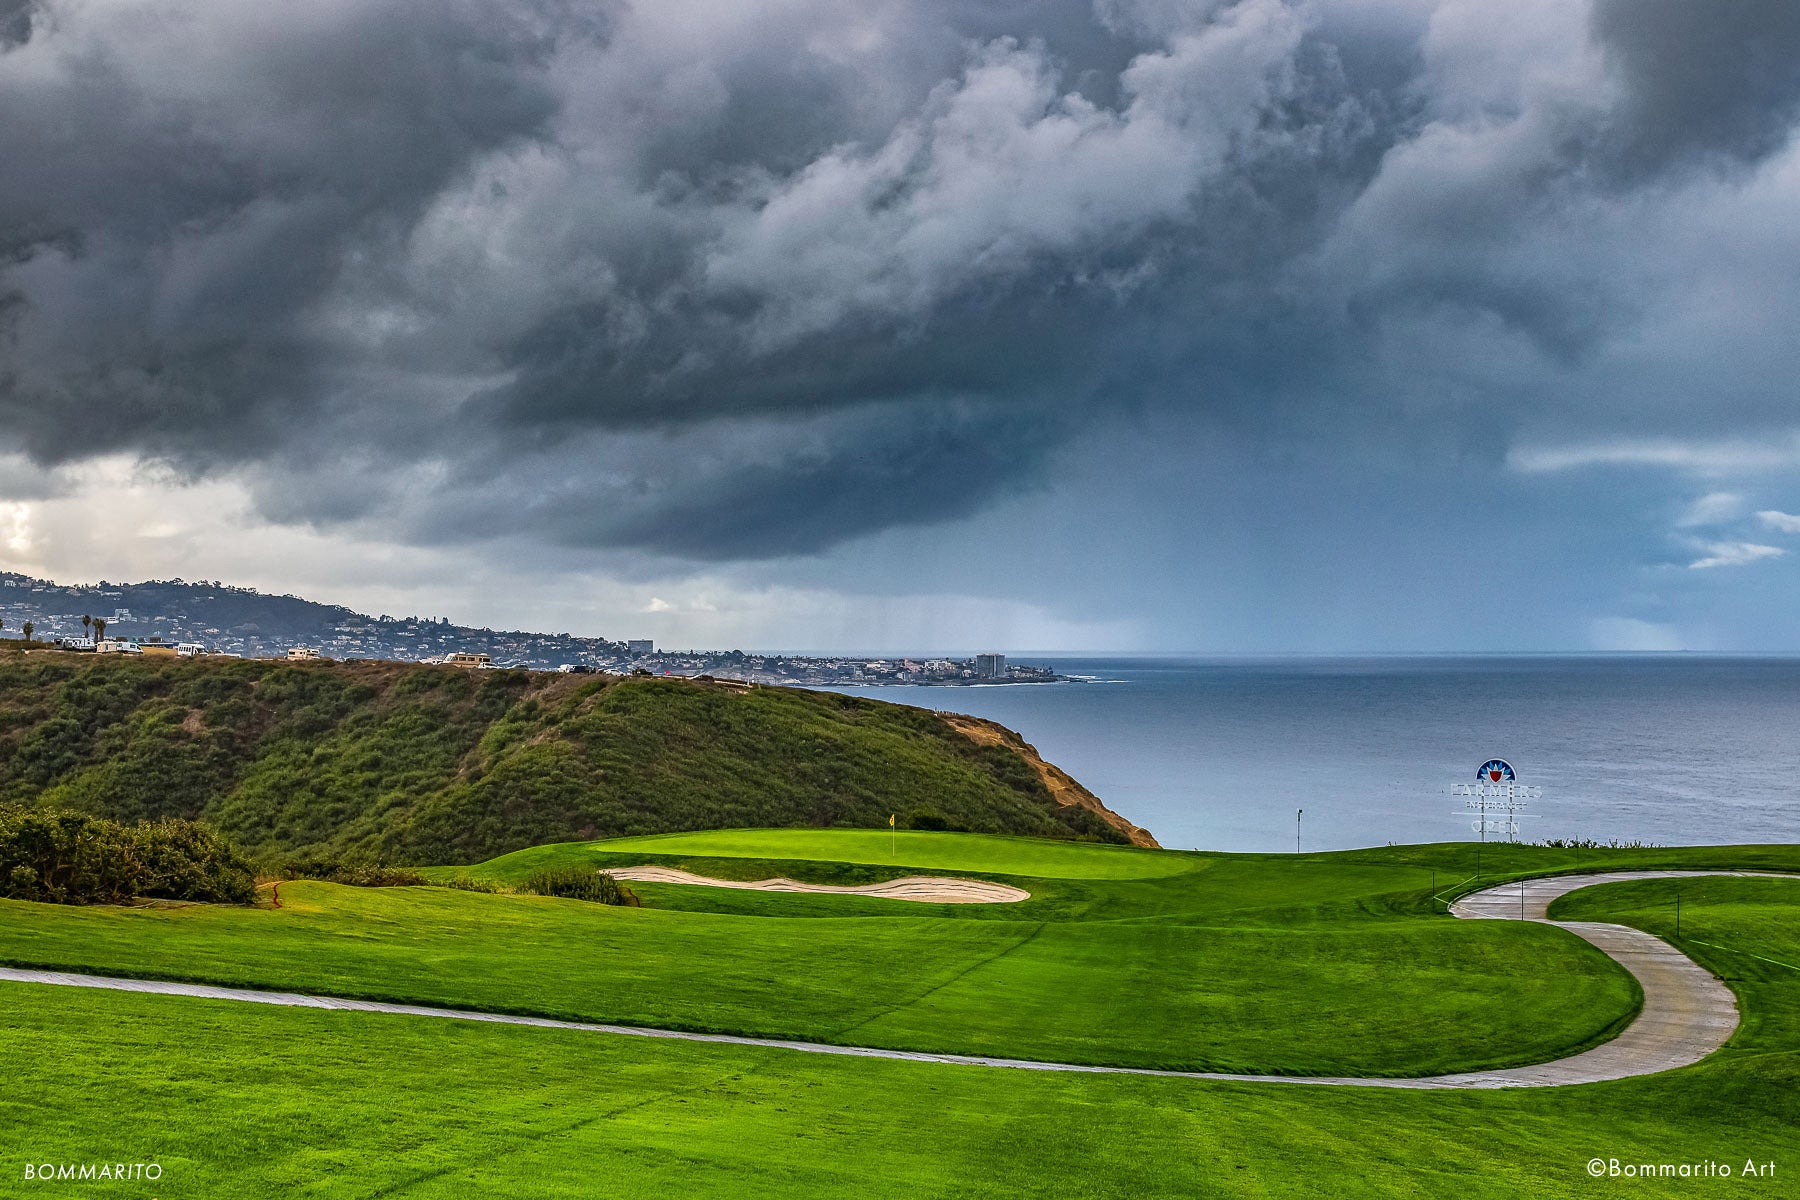 Torrey South #3 - Approaching Storm